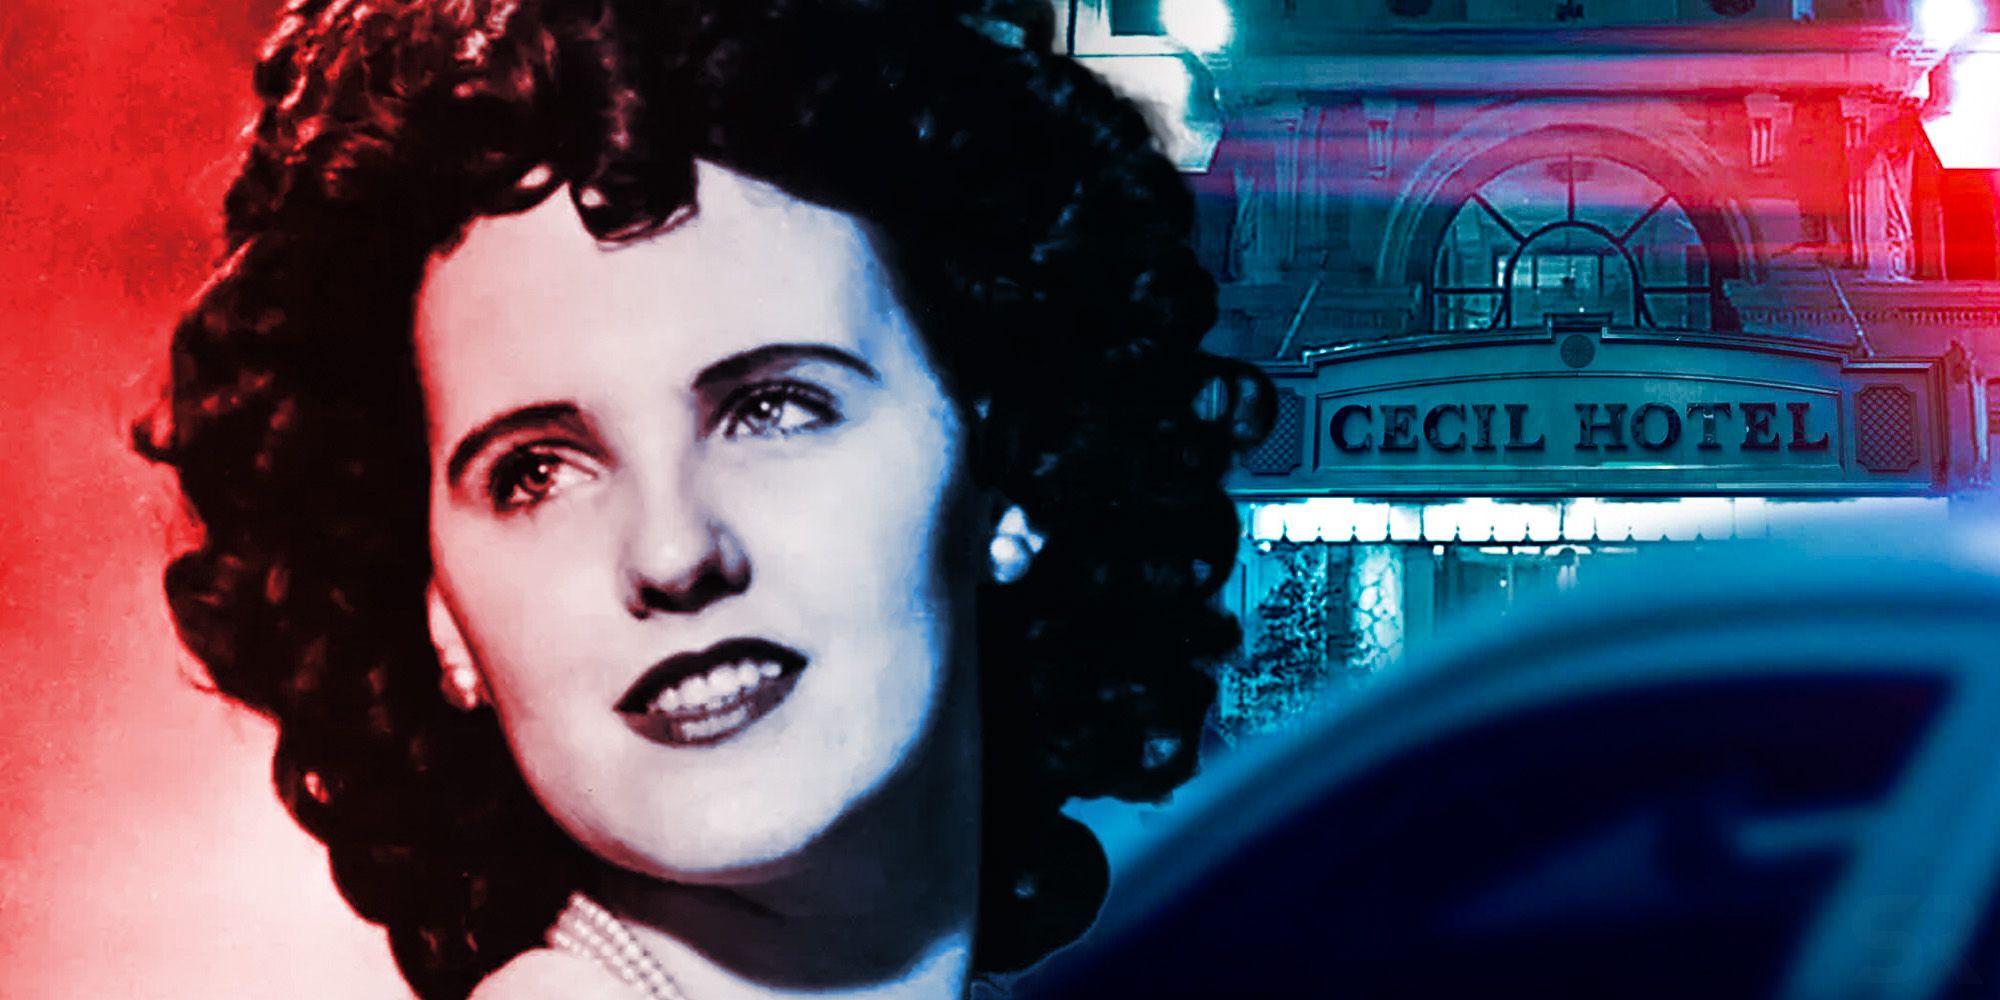 The black dahlia Vanishing at the cecil hotel